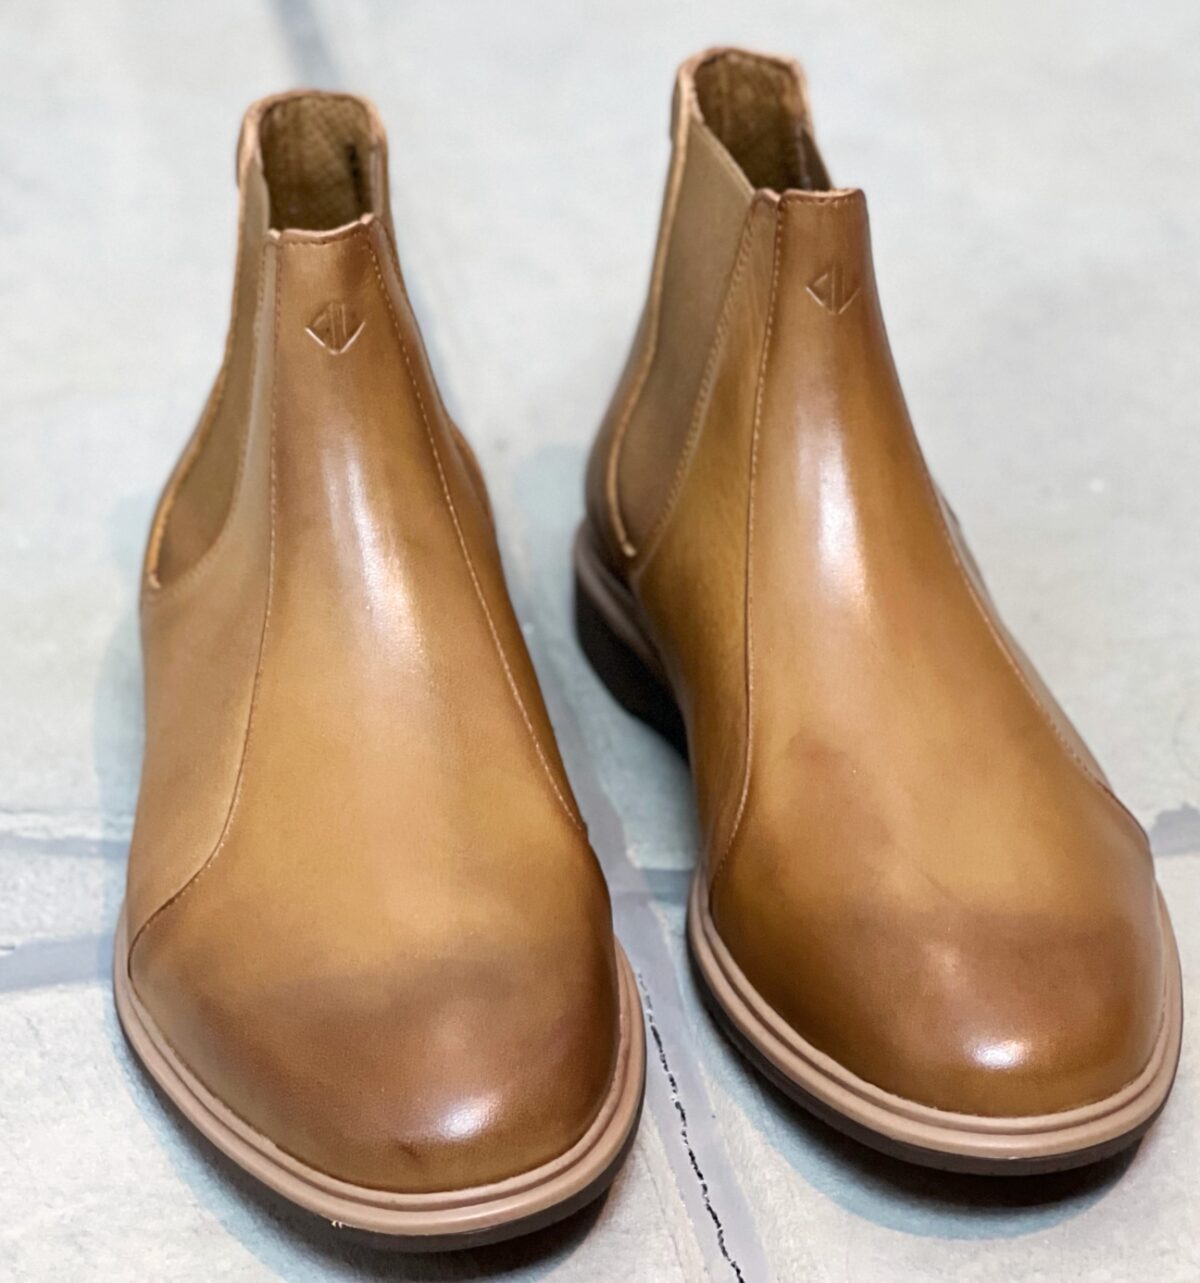 Amberjack Chelsea Boots Review: The Best Chelsea Boot Ever Made?! 1